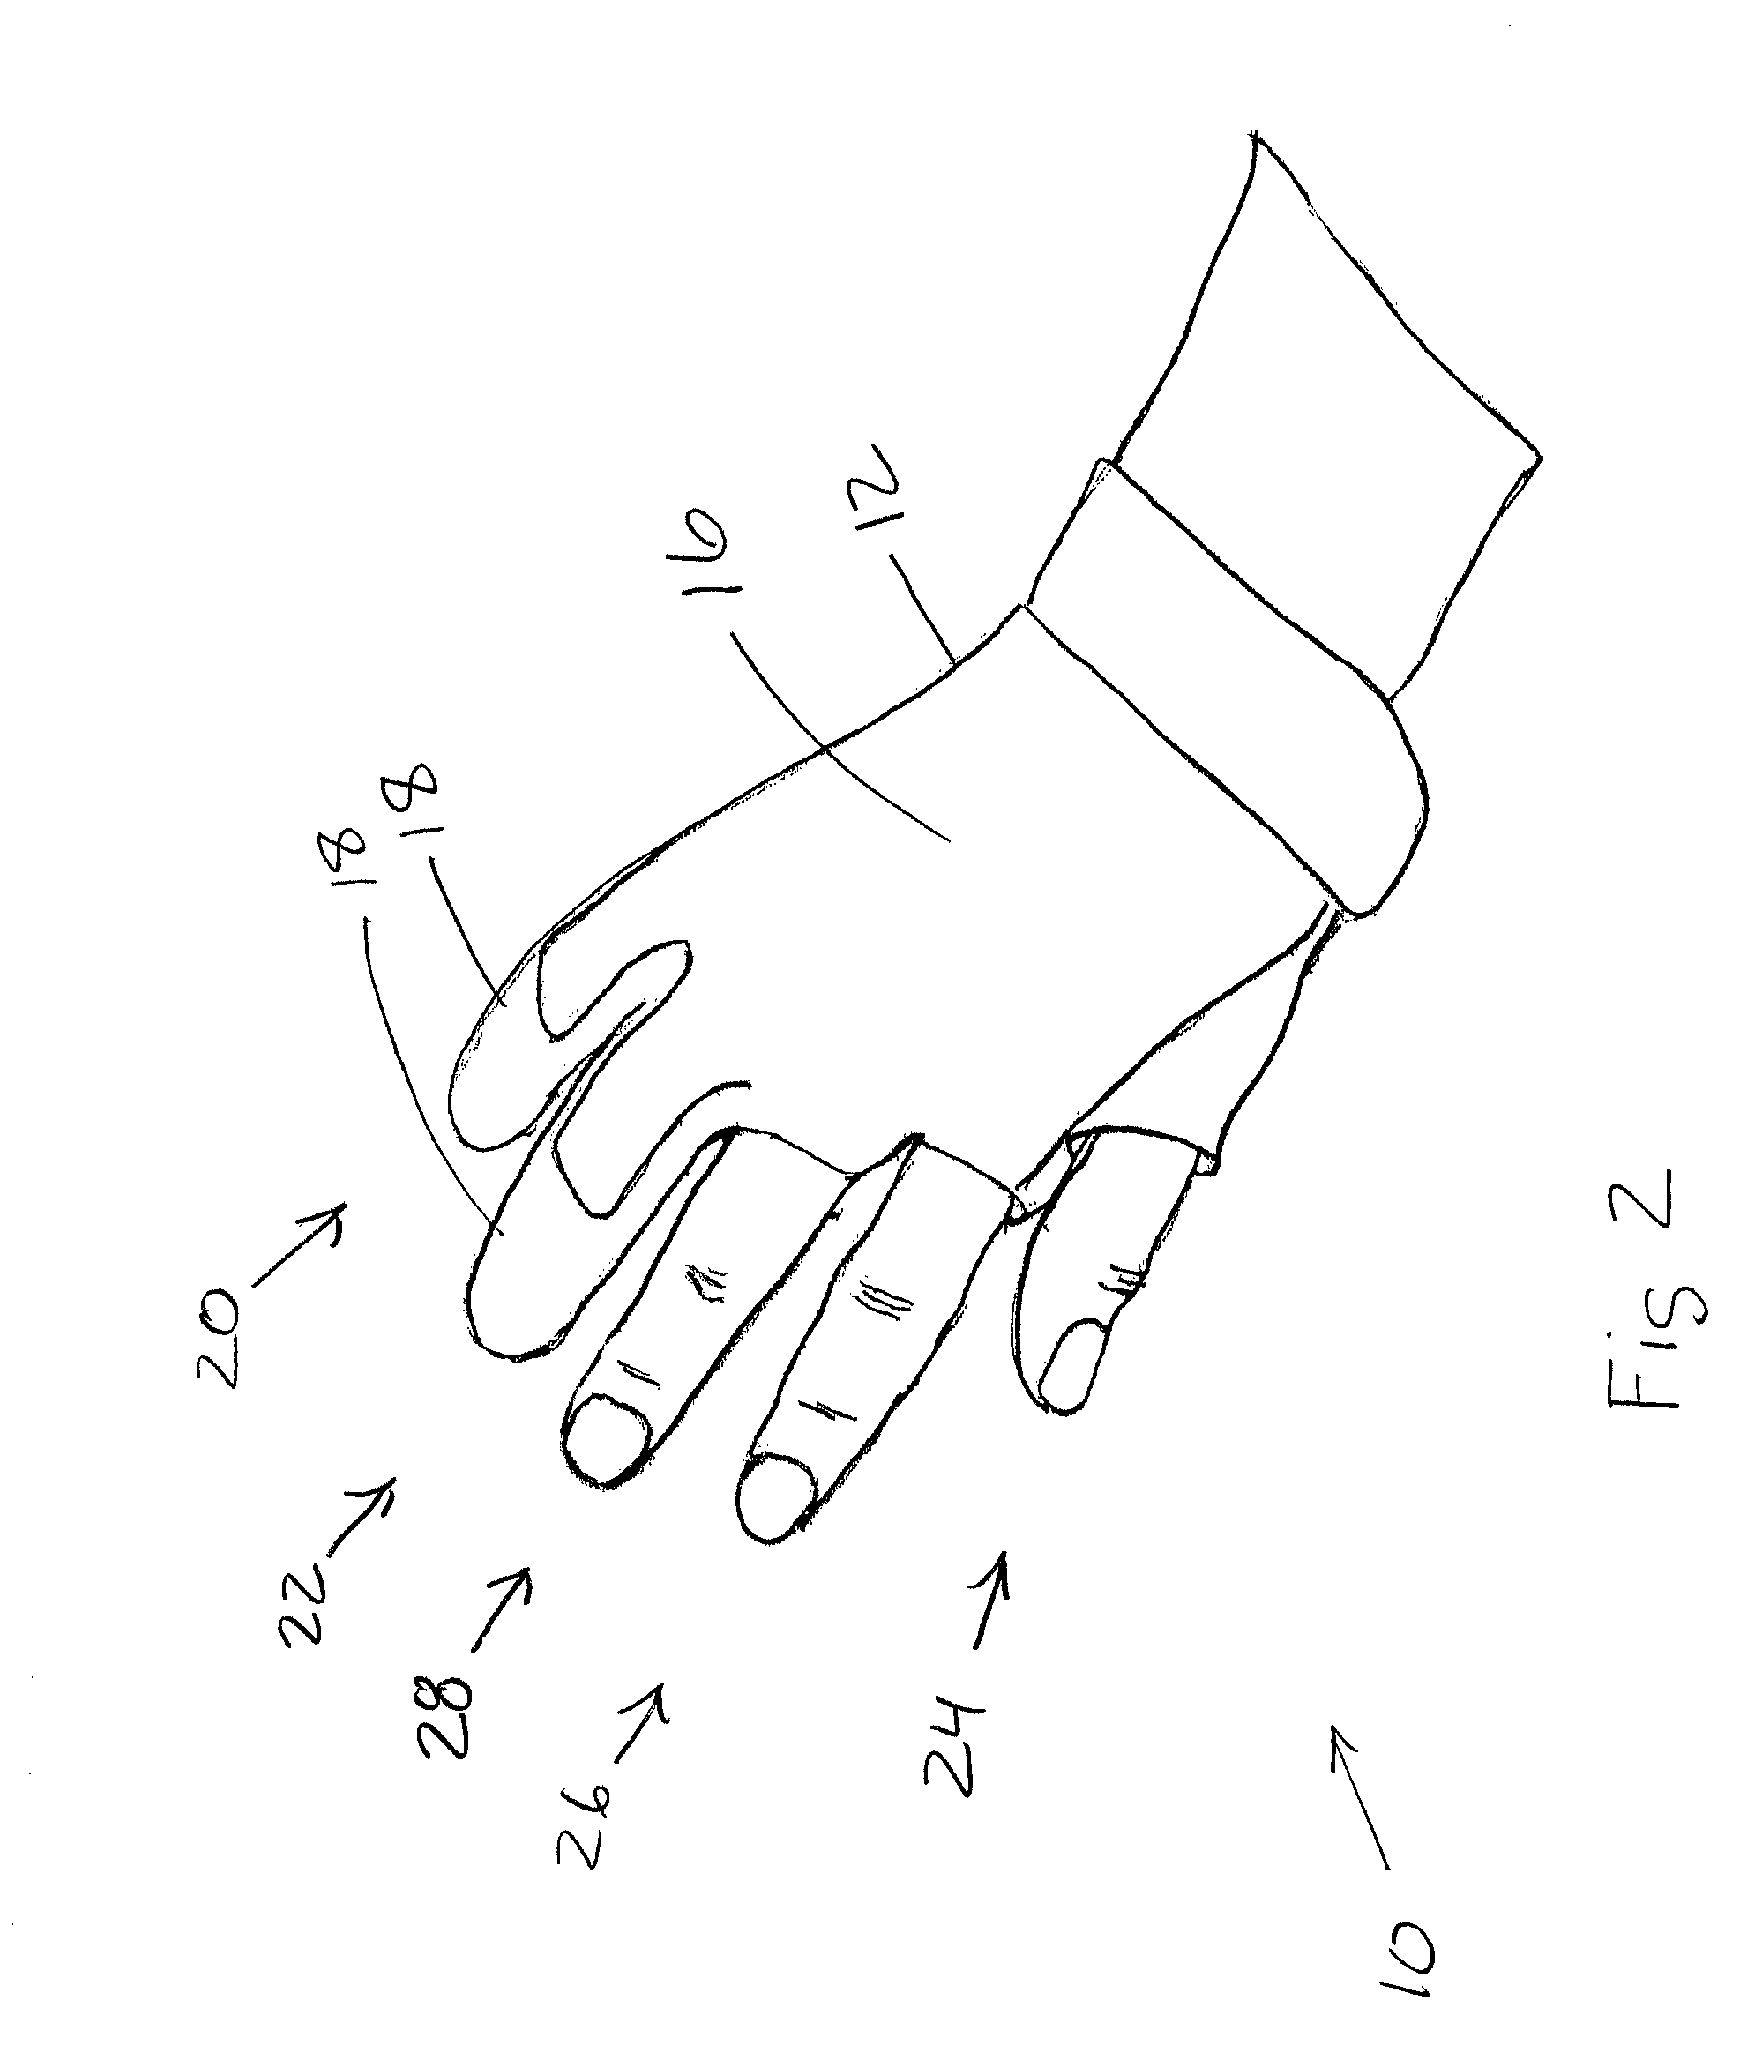 Grasping glove and method of finger restraining therapy